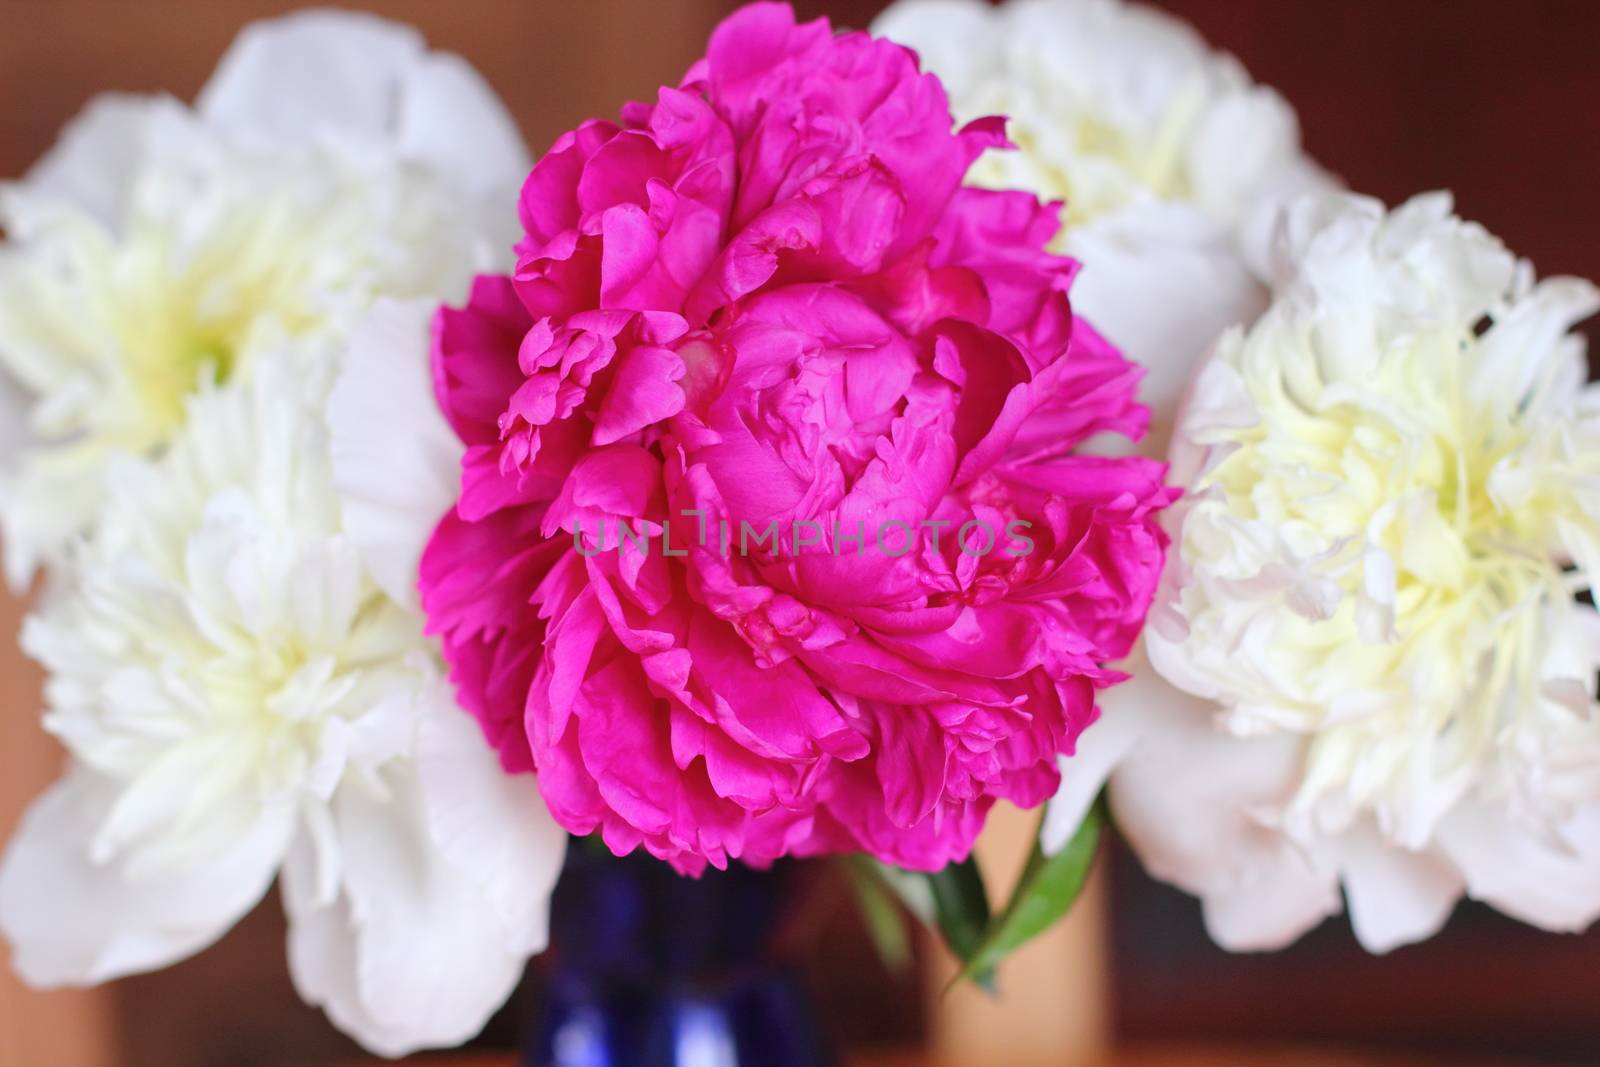 red and white peonies in a vase. Bouquet of flowers